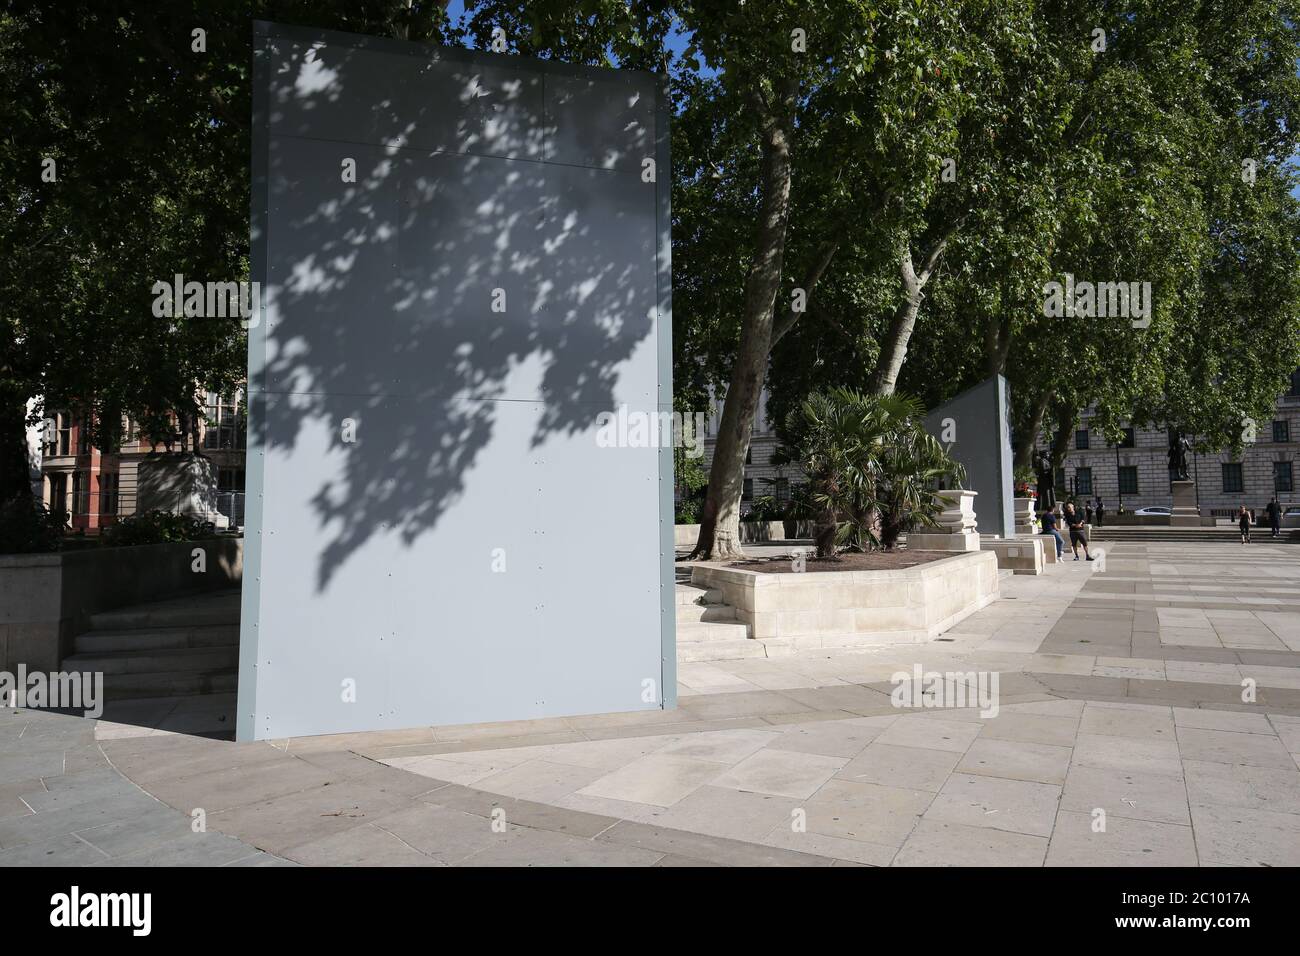 A boarded up Nelson Mandela statue on Parliament Square, London before a possible protest by the Democratic football Lads Alliance against a Black Lives Matter protest. Stock Photo